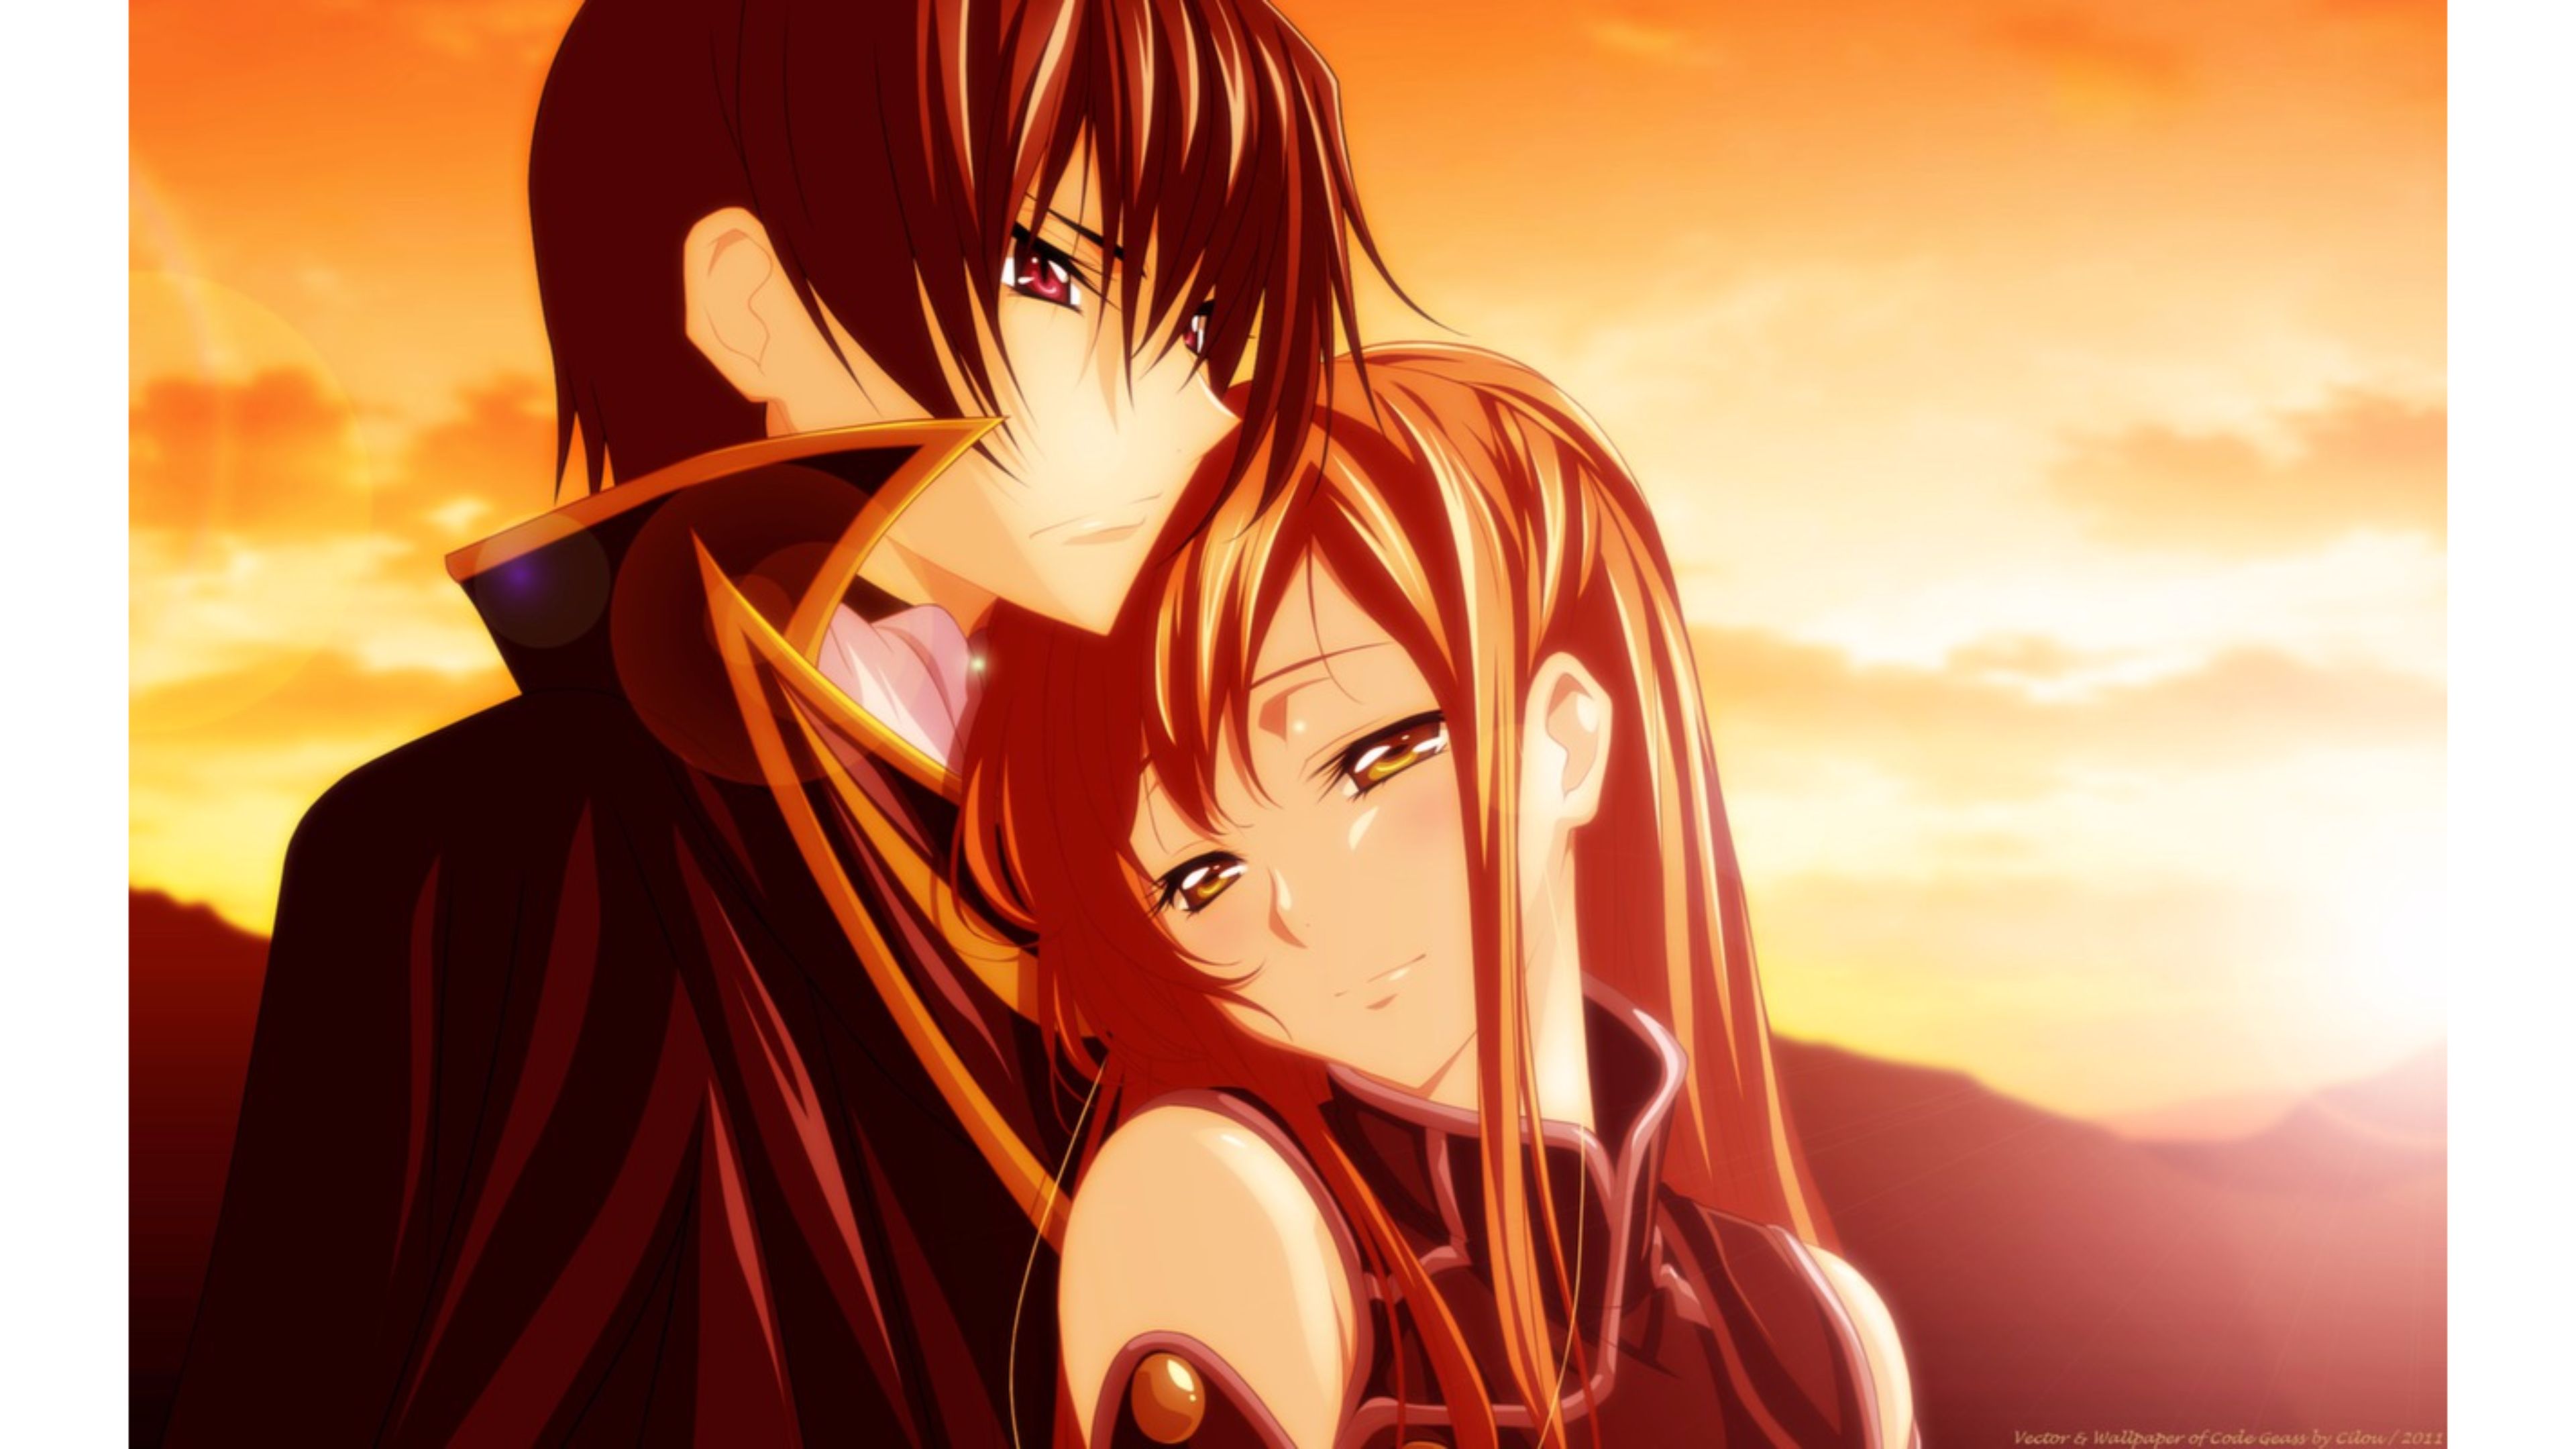 anime love wallpapers #17